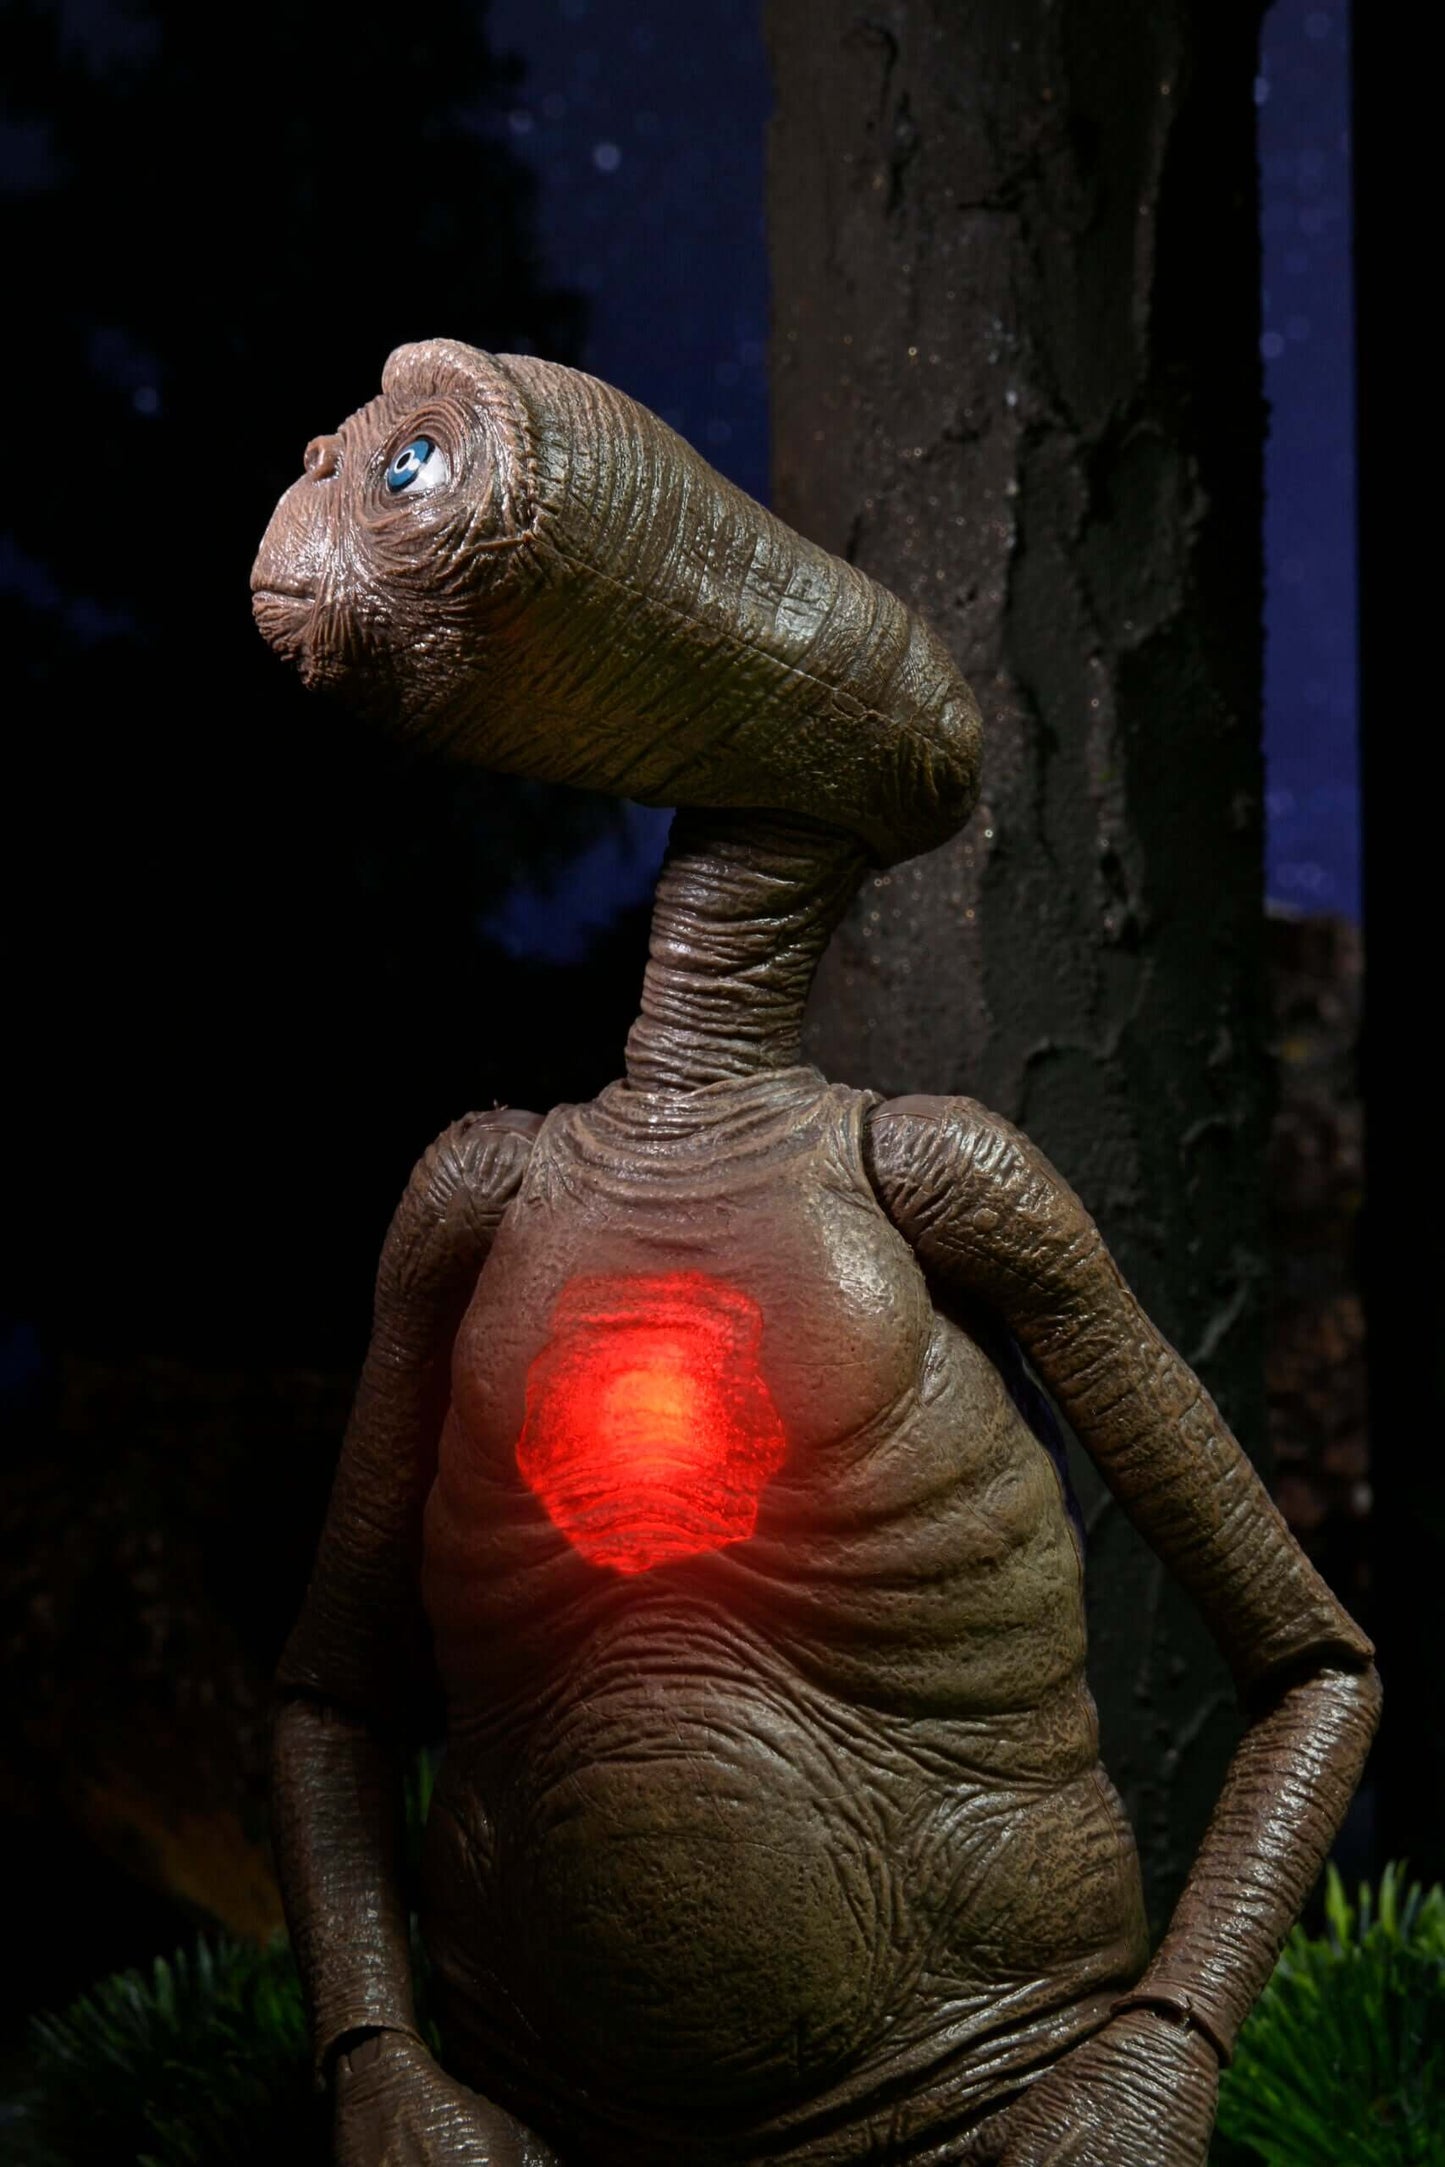 E.T. 40th Anniversary

7″ Scale Action Figure – Deluxe Ultimate E.T. with LED Chest